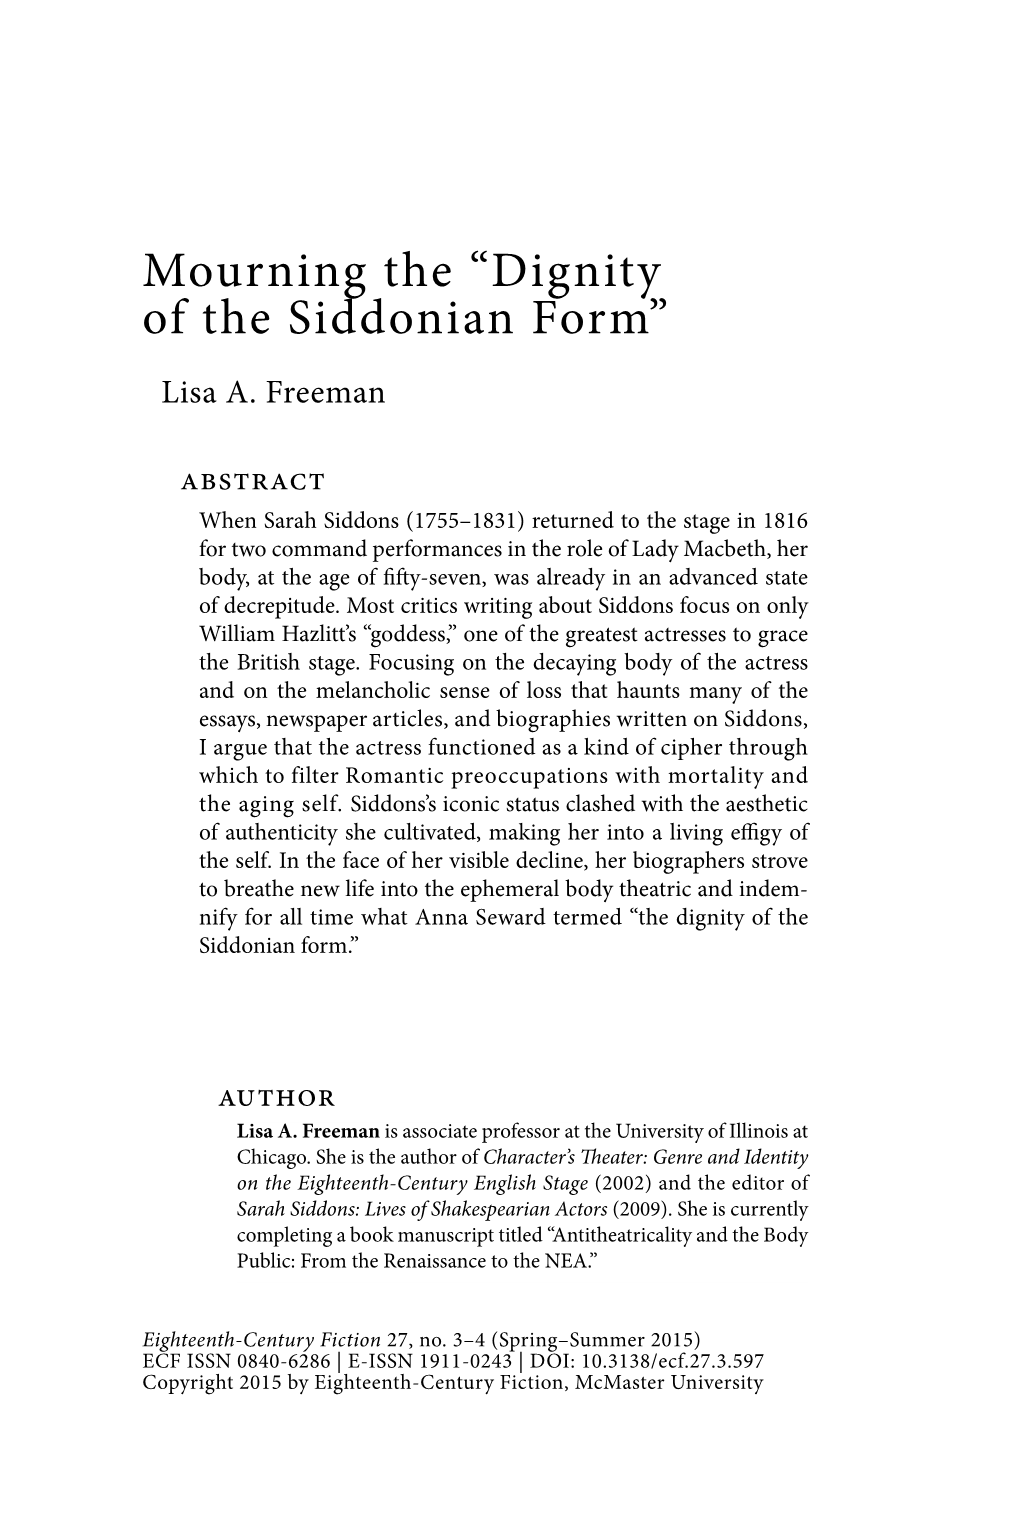 Mourning the “Dignity of the Siddonian Form” Lisa A